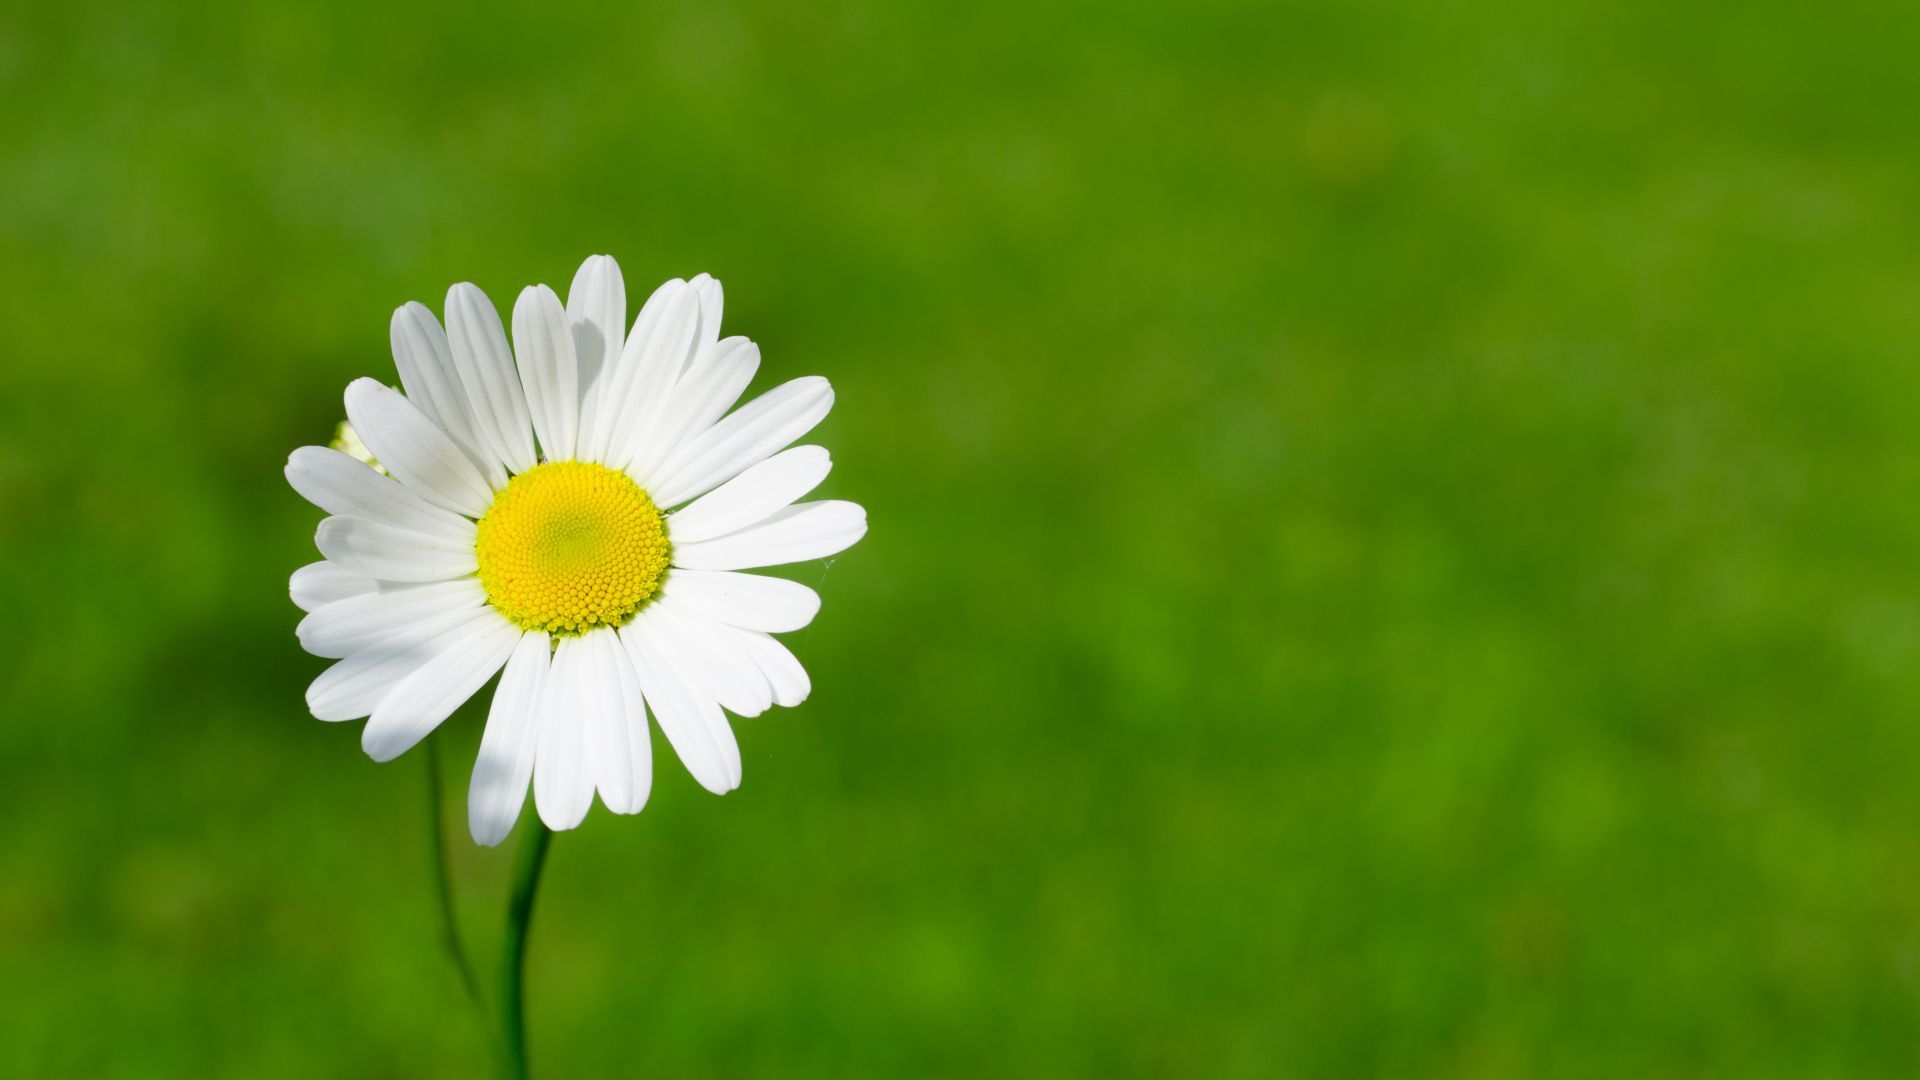 Desktop Wallpaper Daisy, Flowers, White Flowers, Spring, 4k, HD Image, Picture, Background, E28a1f